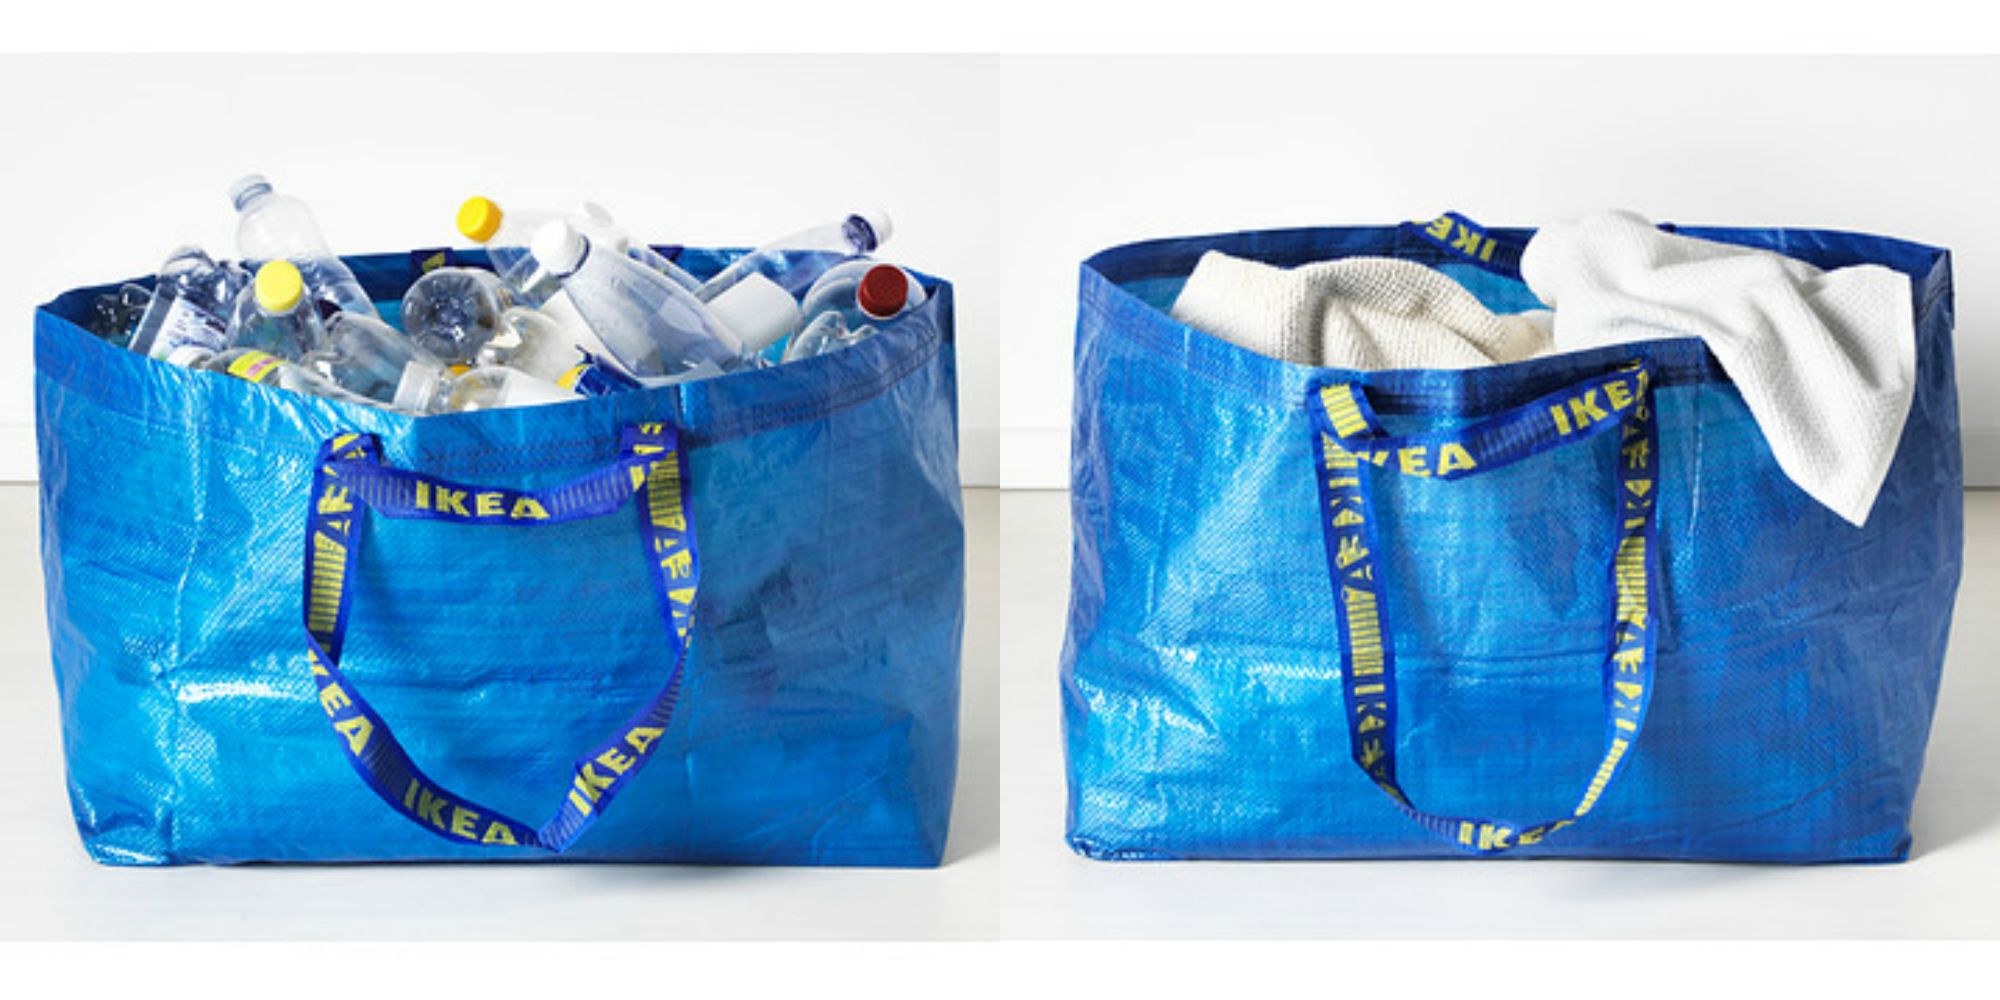 Ikea makes tiny blue tote bags for storage, but in Japan they're used for  anime figurines | SoraNews24 -Japan News-